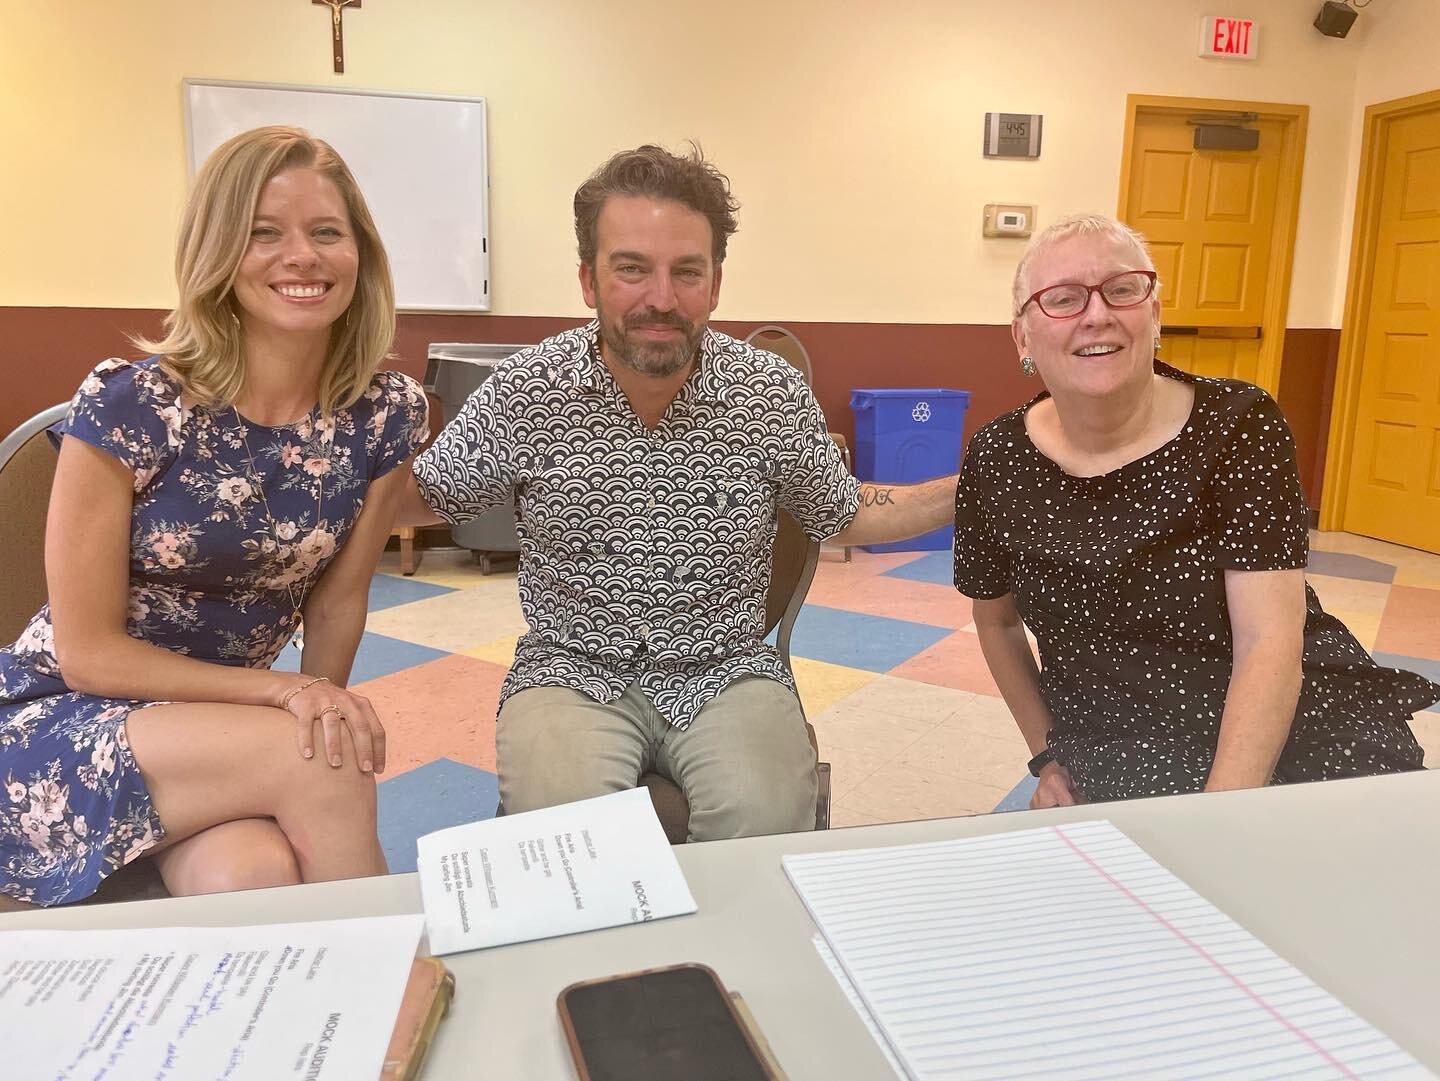 We have been learning A LOT here at #studiofestsantafe . Thank you @james.gaffigan and Erie Mills for sitting in on our Mock Auditions and giving such wise insights on music-making and the opera industry. A special shout out goes to Chuck at Santa Fe